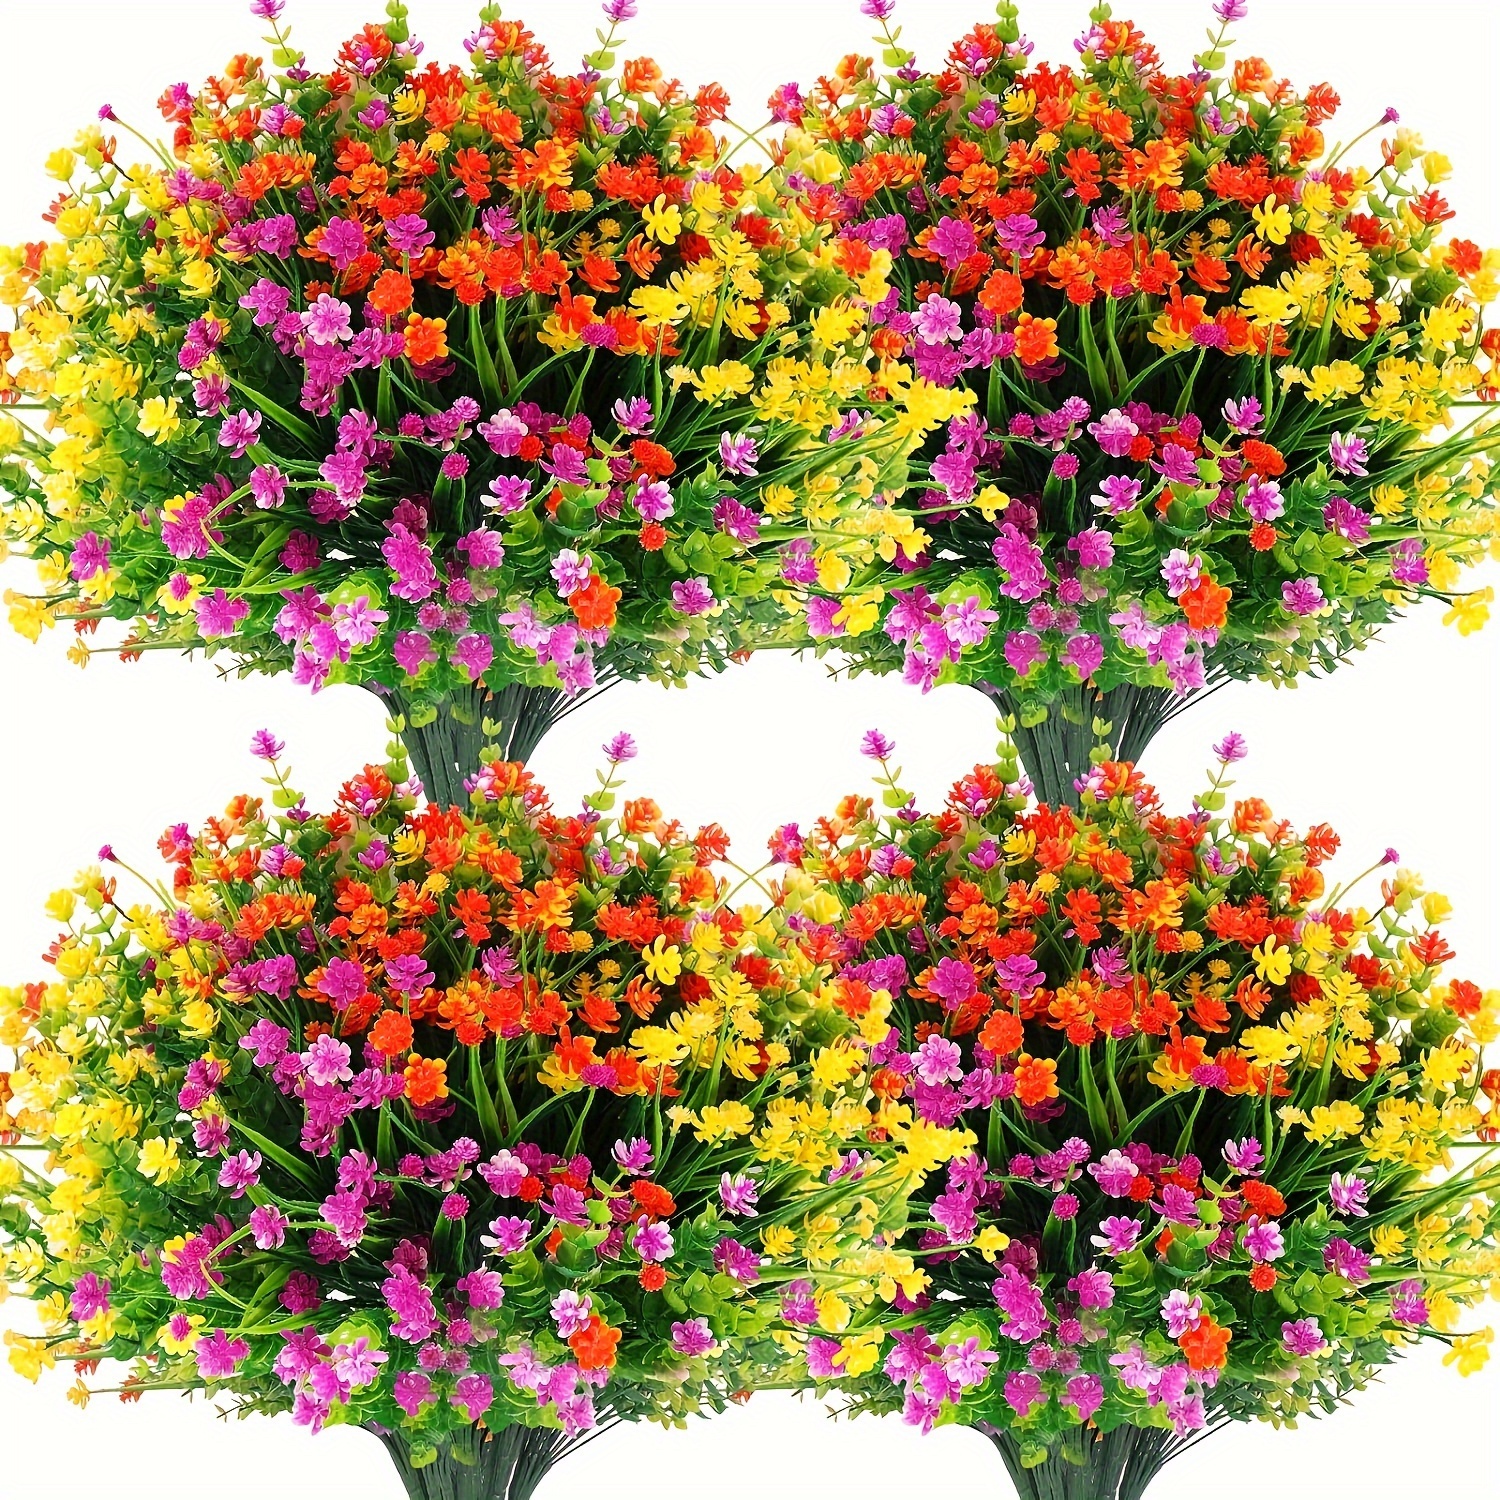 

36 Bundles Artificial Outdoor Flowers Plastic Uv Resistant Colorful Wild Flowers Fake Flowers Shrubs For Outdoor Window Porch Spring Summer Home Decor